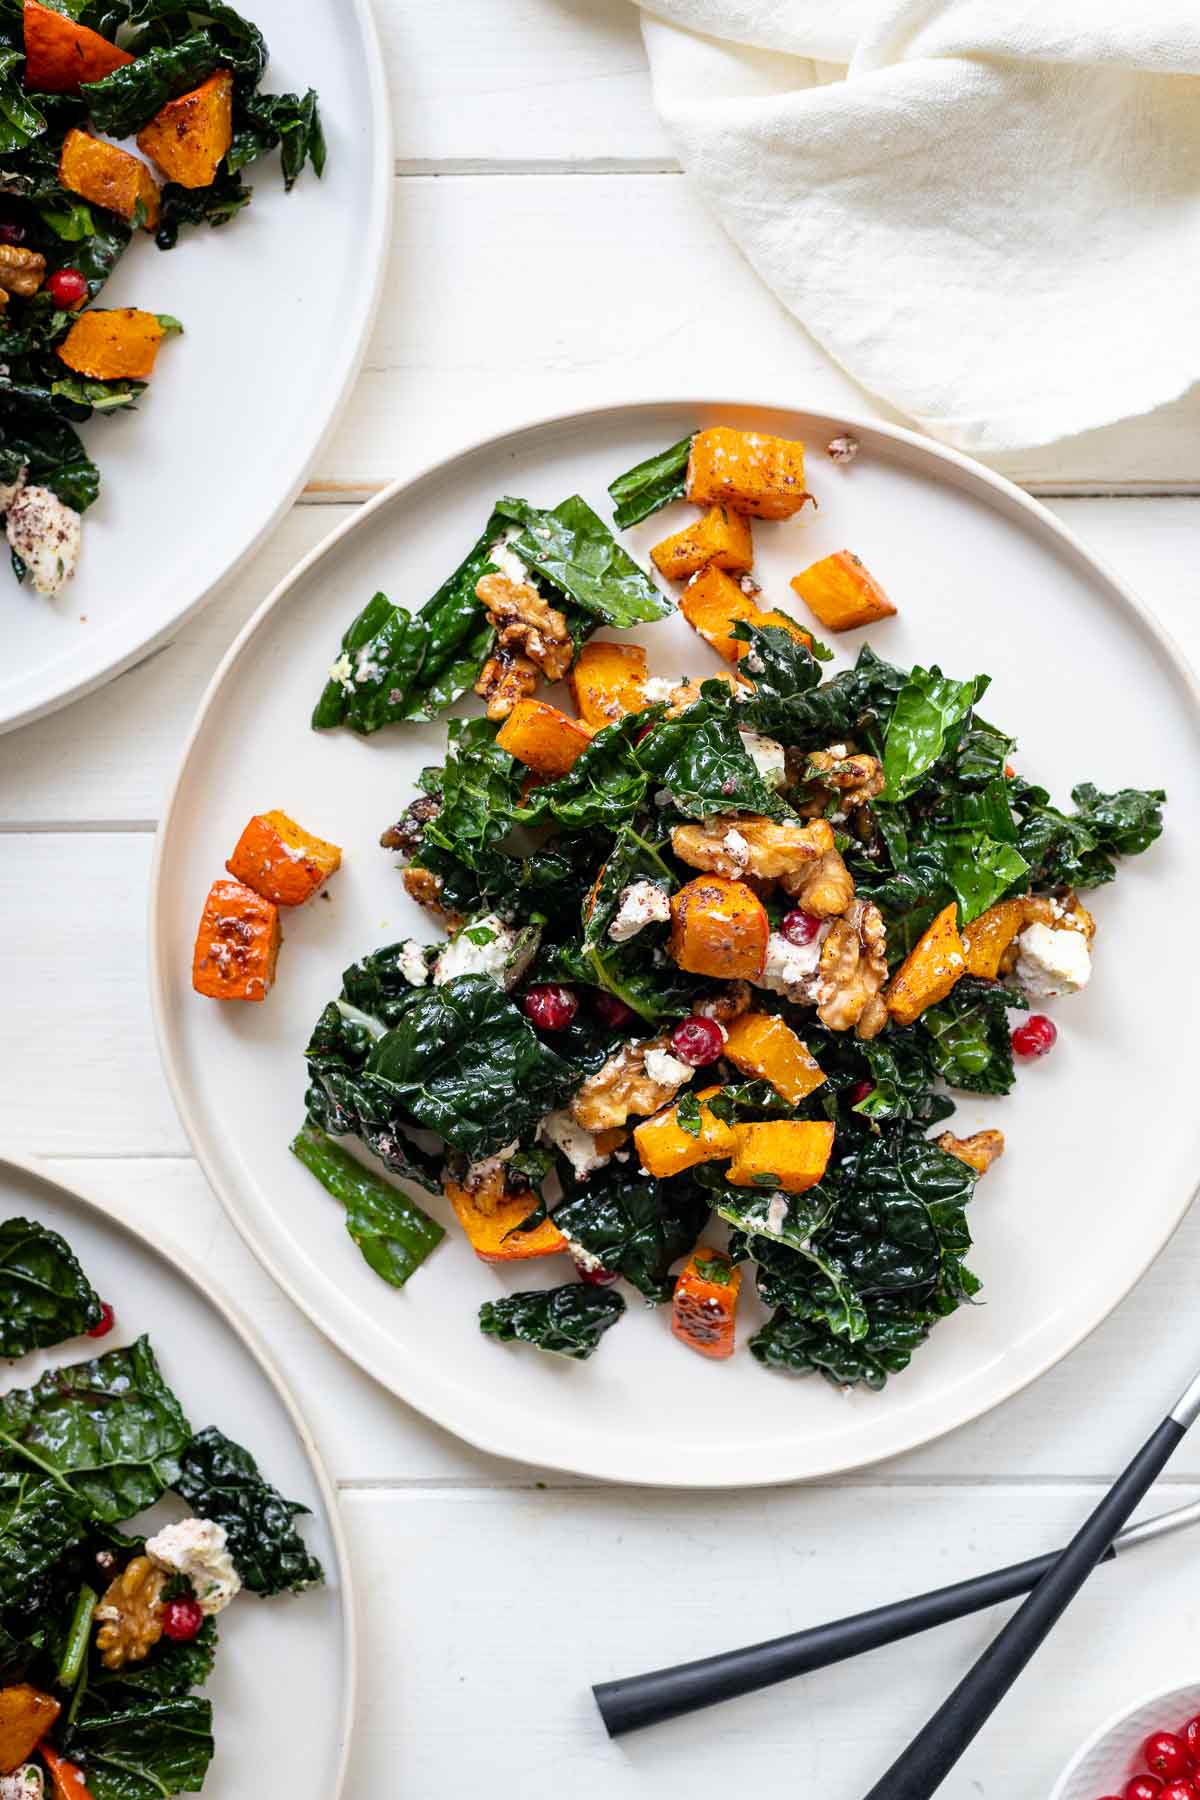 Roasted Pumpkin with Tuscan Kale Salad with Goat Cheese and Candied Walnuts